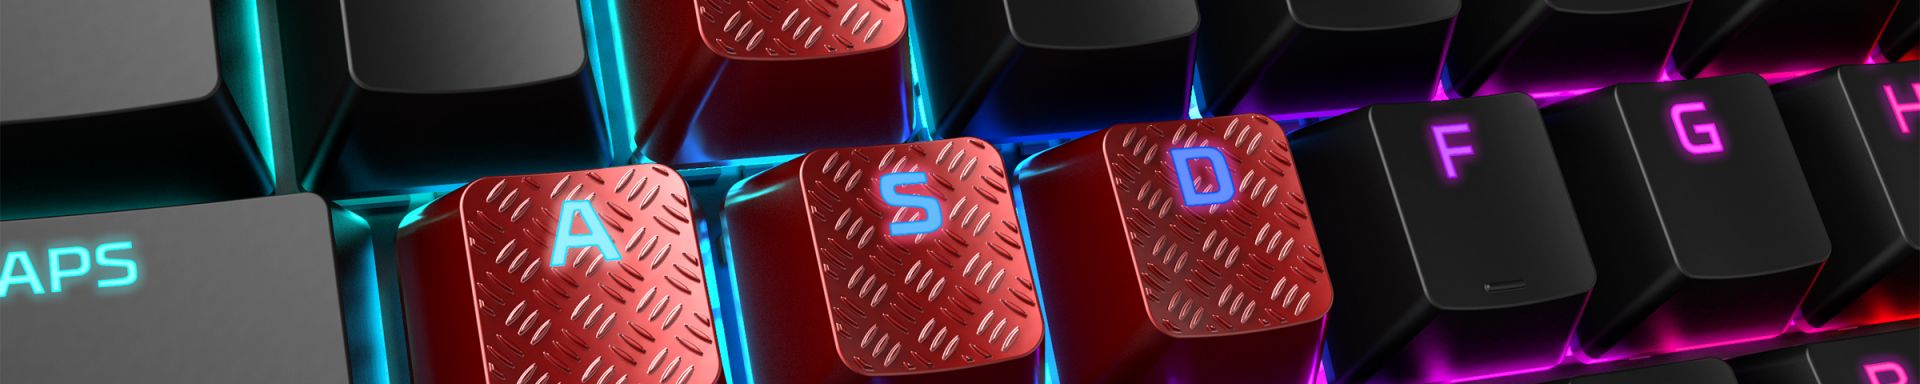 Hyperx Fps Keycaps Red Nordic Game Supply